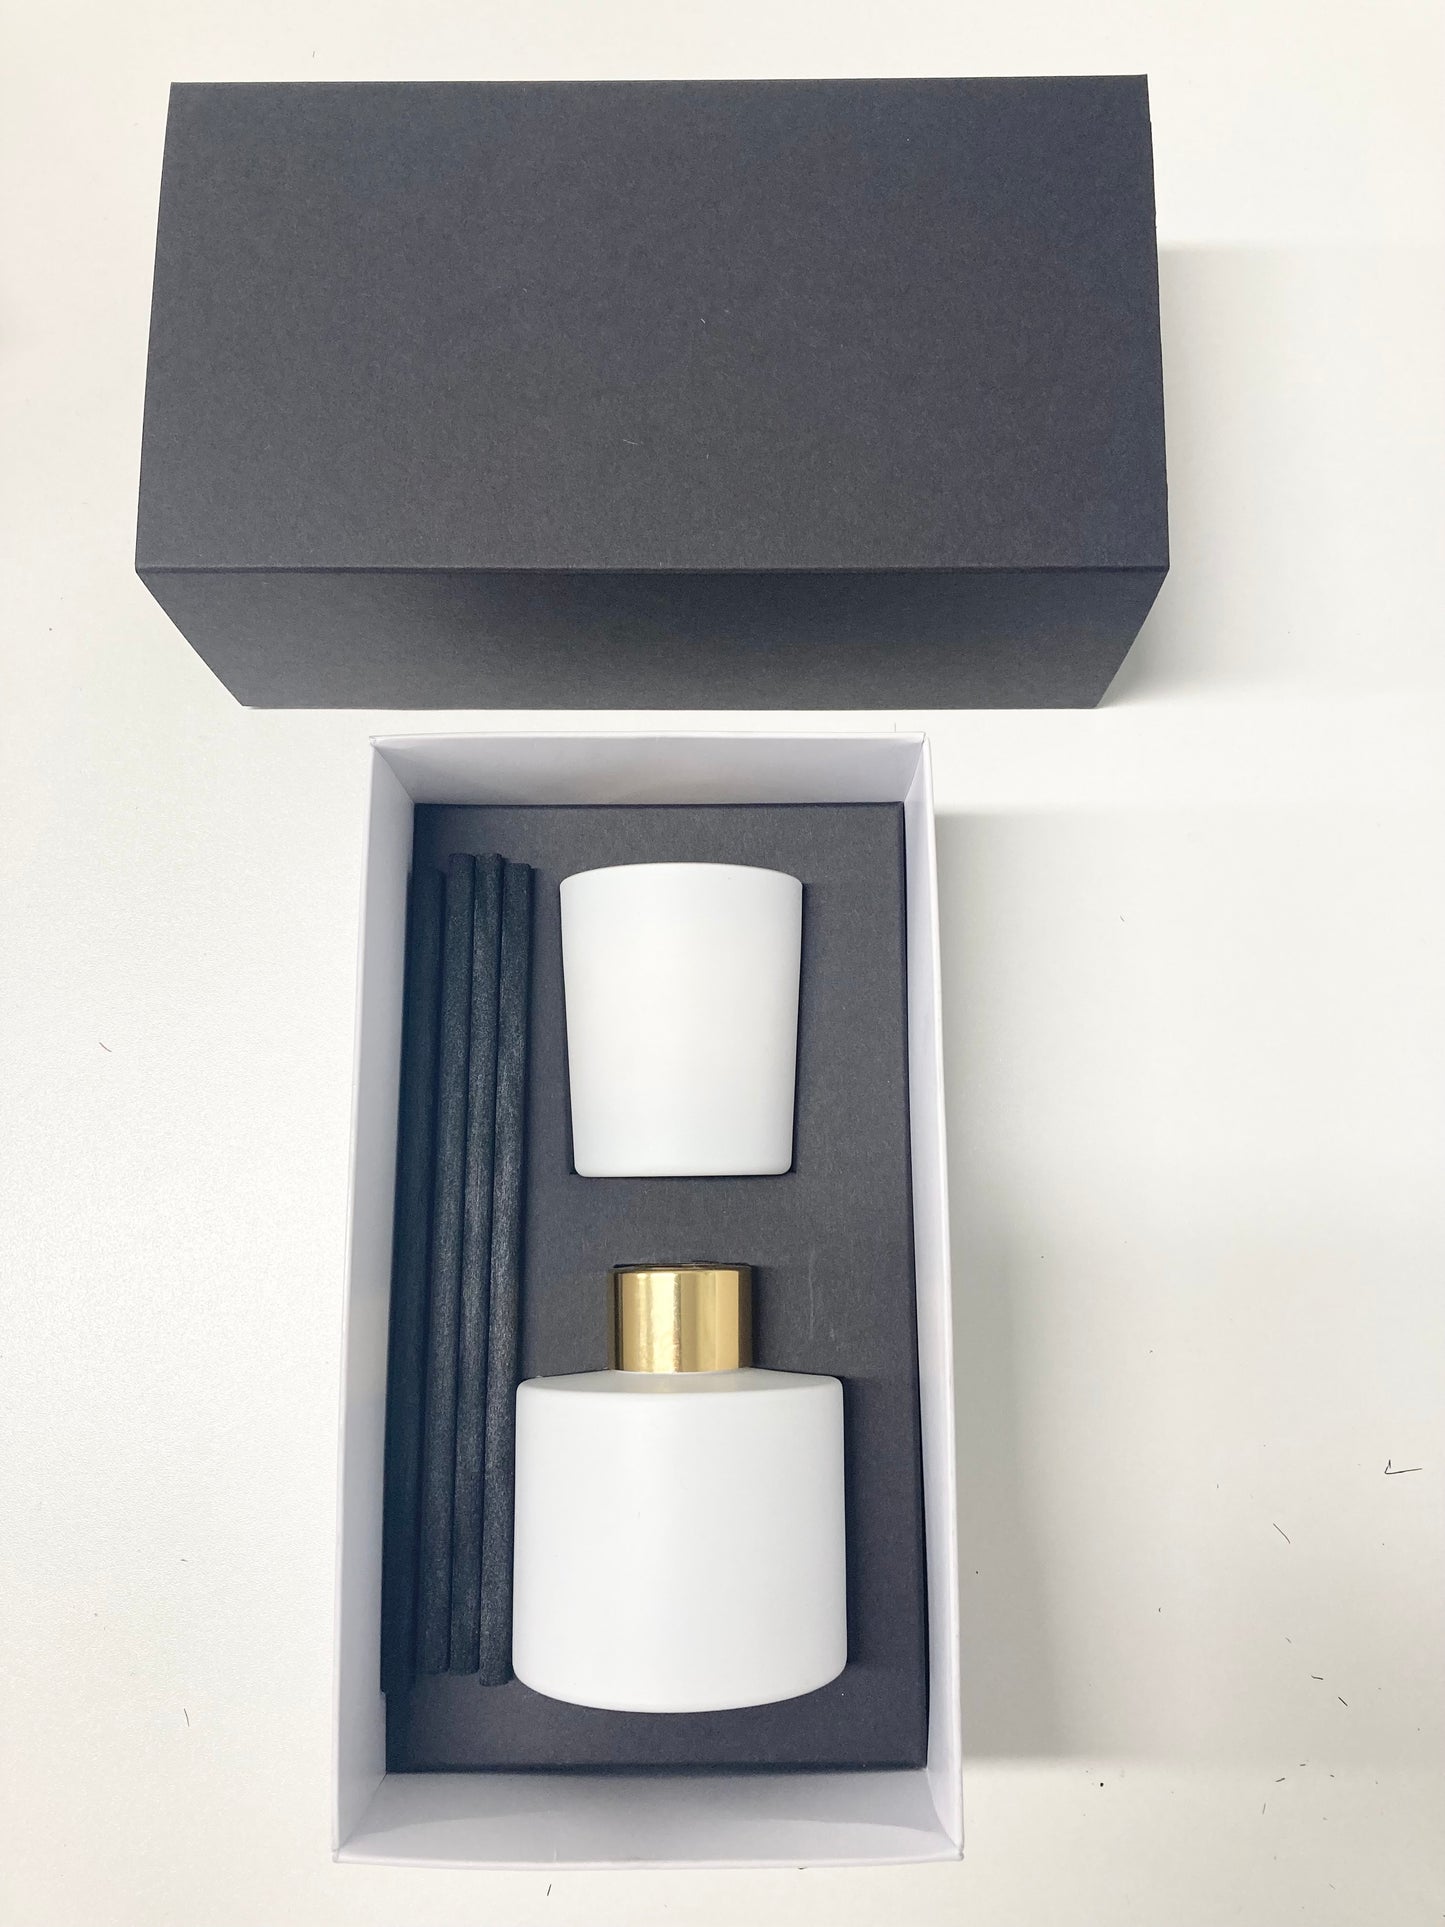 100ml DIFFUSER/9cl VOTIVE CANDLE GIFT BOX - WHITE/BLACK with black insert (Pack of 10)